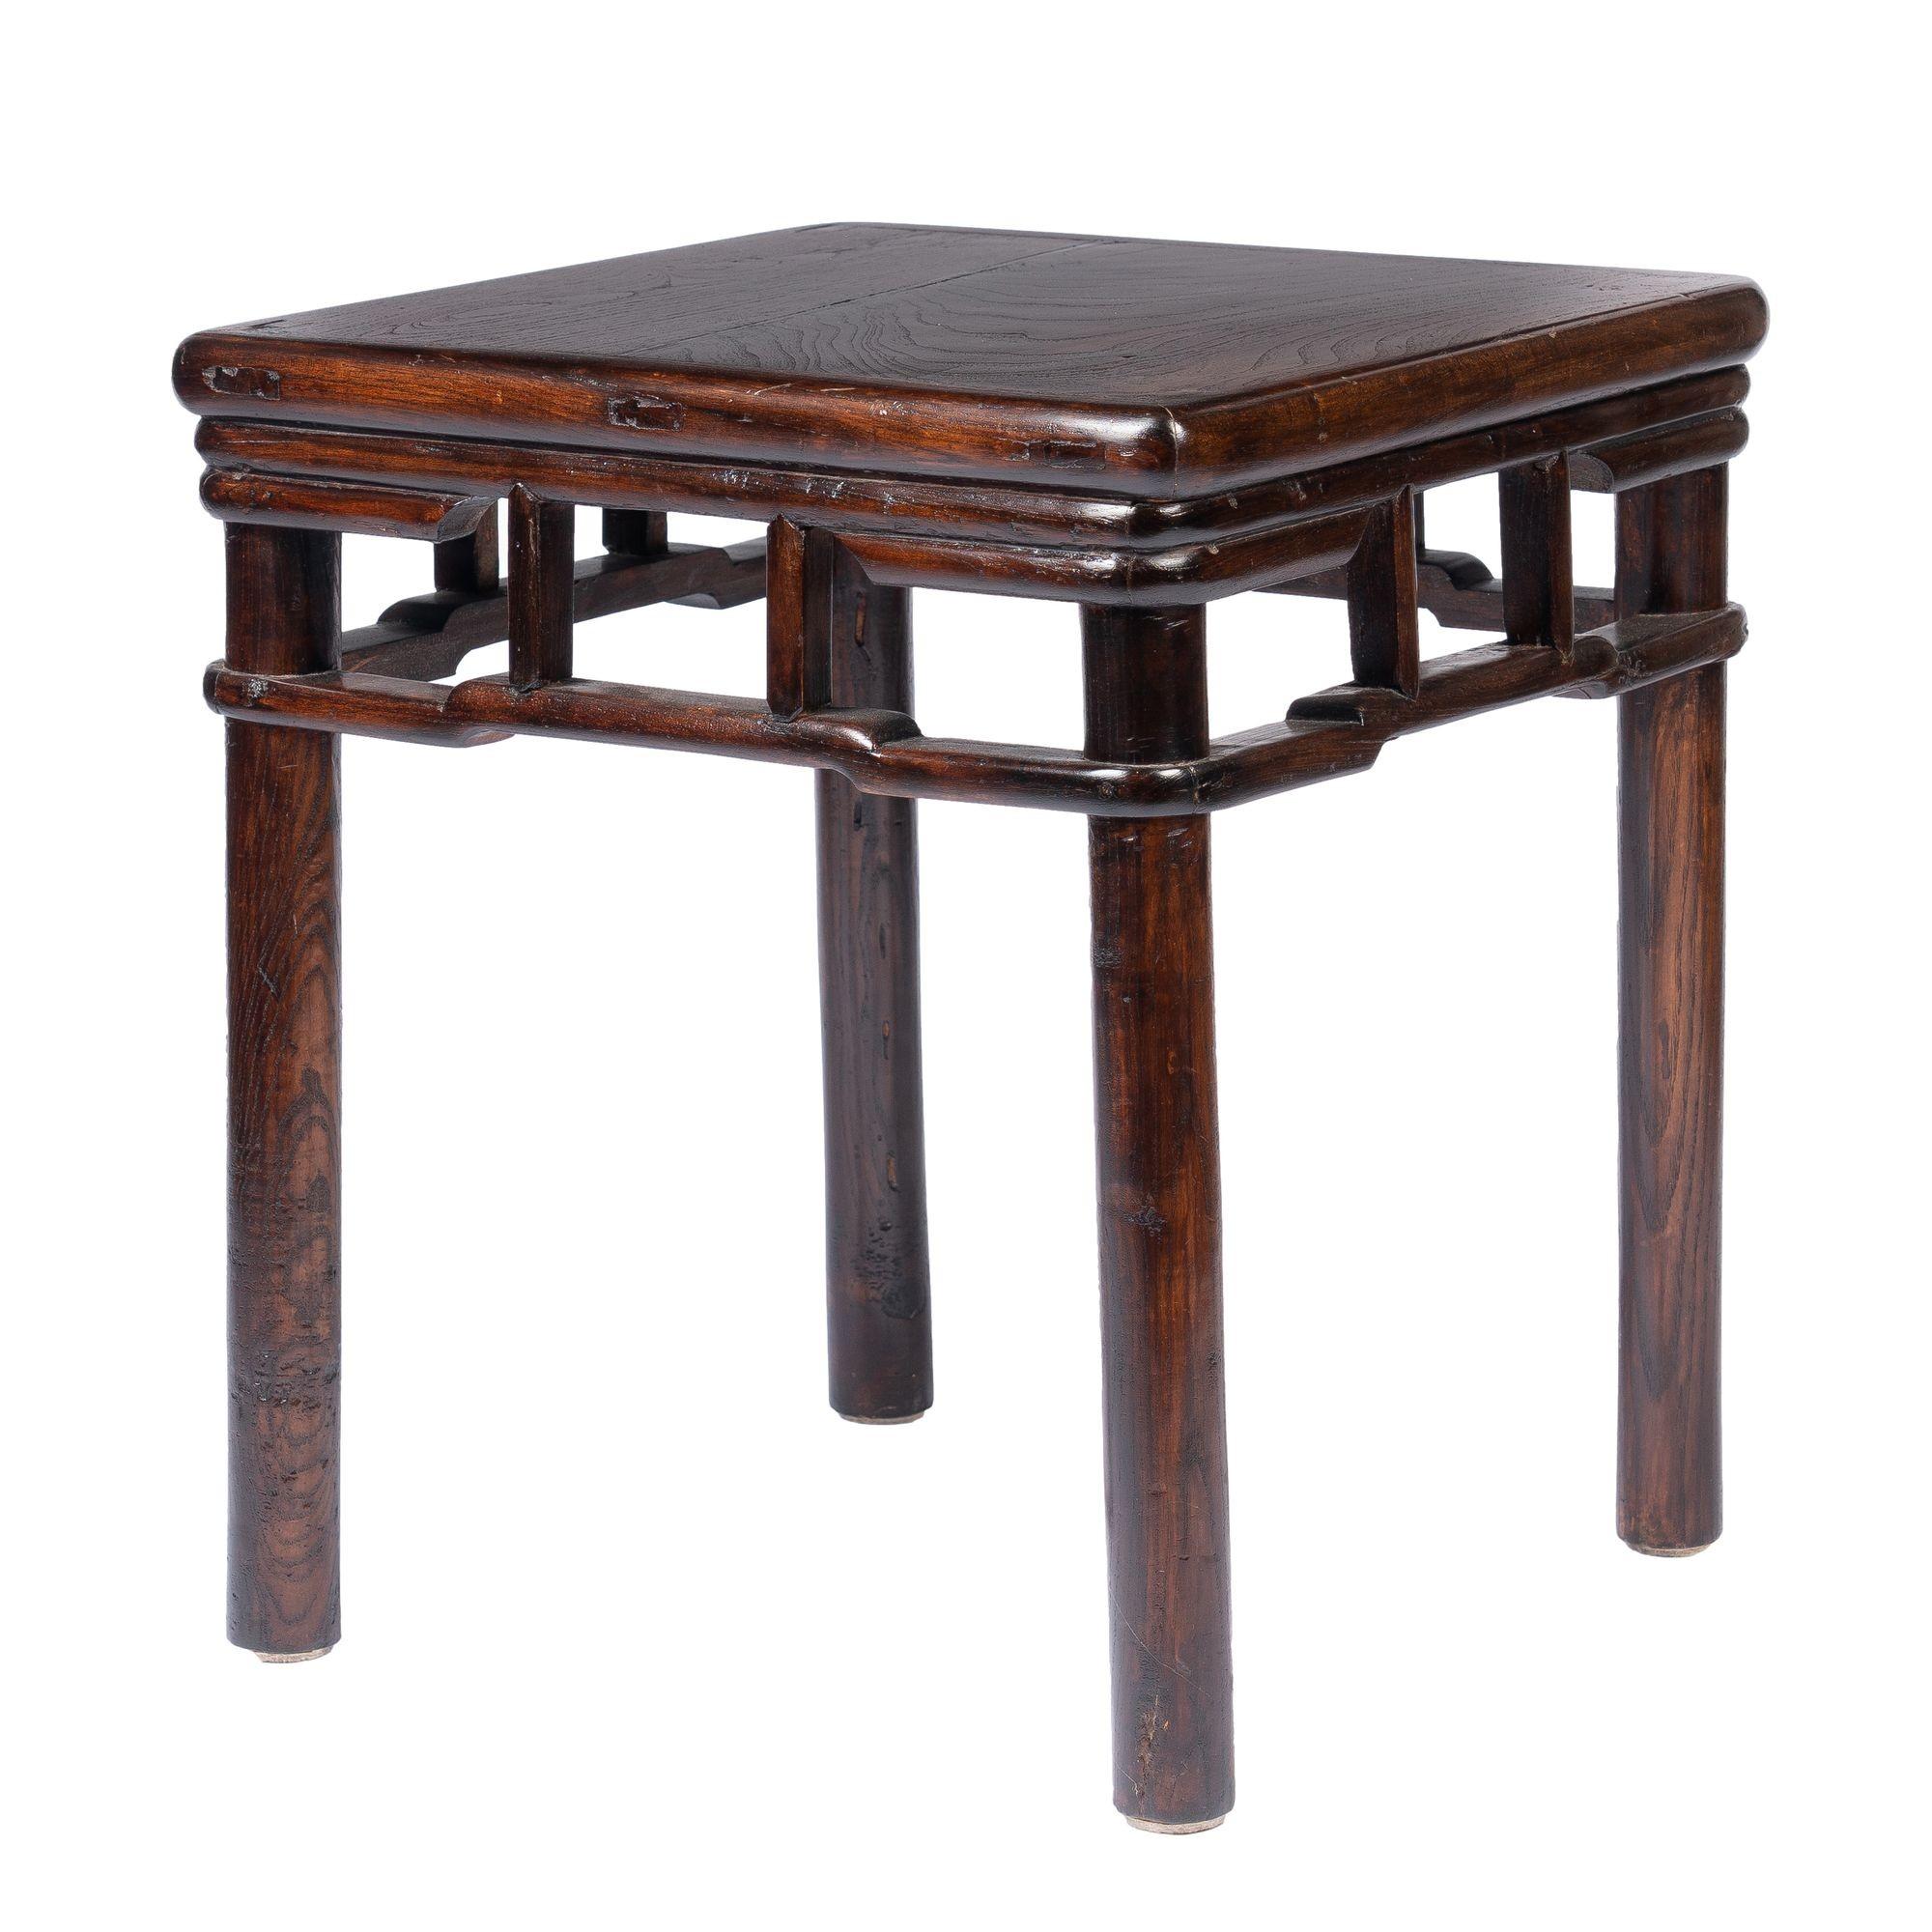 Pair of Chinese Elm Stools with Hump Back Rail, 1780-1820 In Good Condition For Sale In Kenilworth, IL